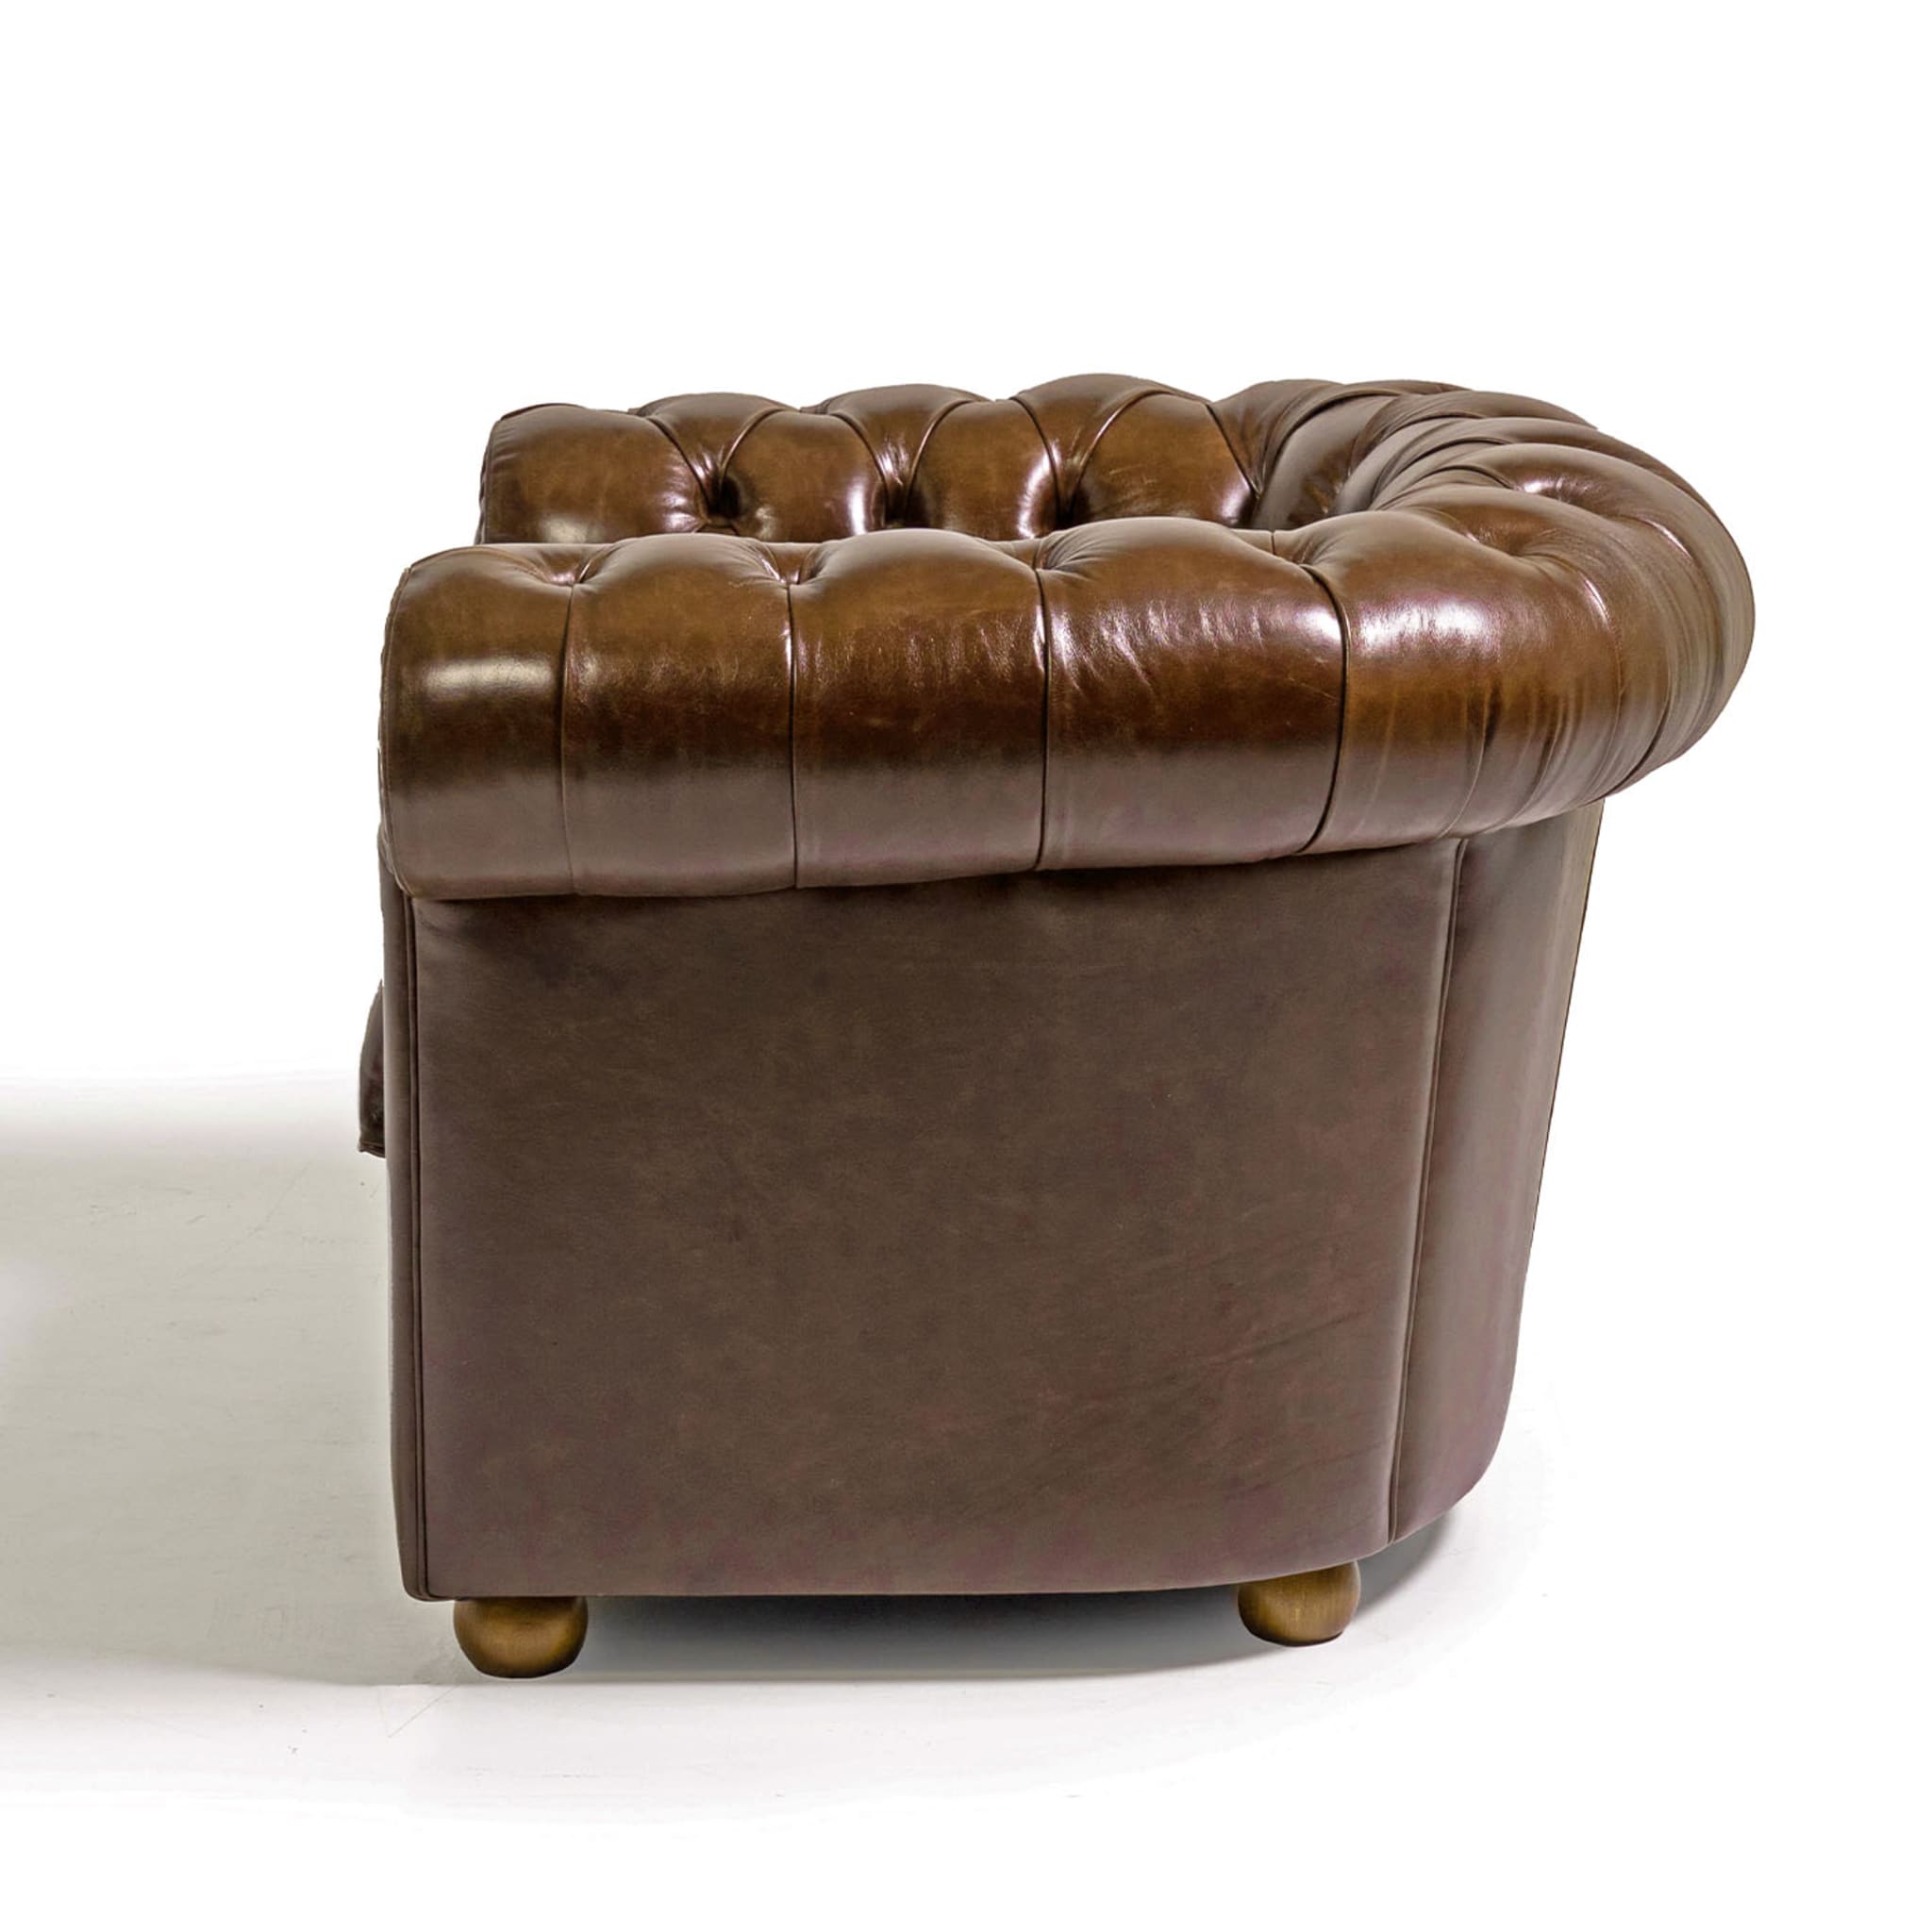 Chesterfield Brown Leather Armchair Tribeca Collection - Alternative view 1